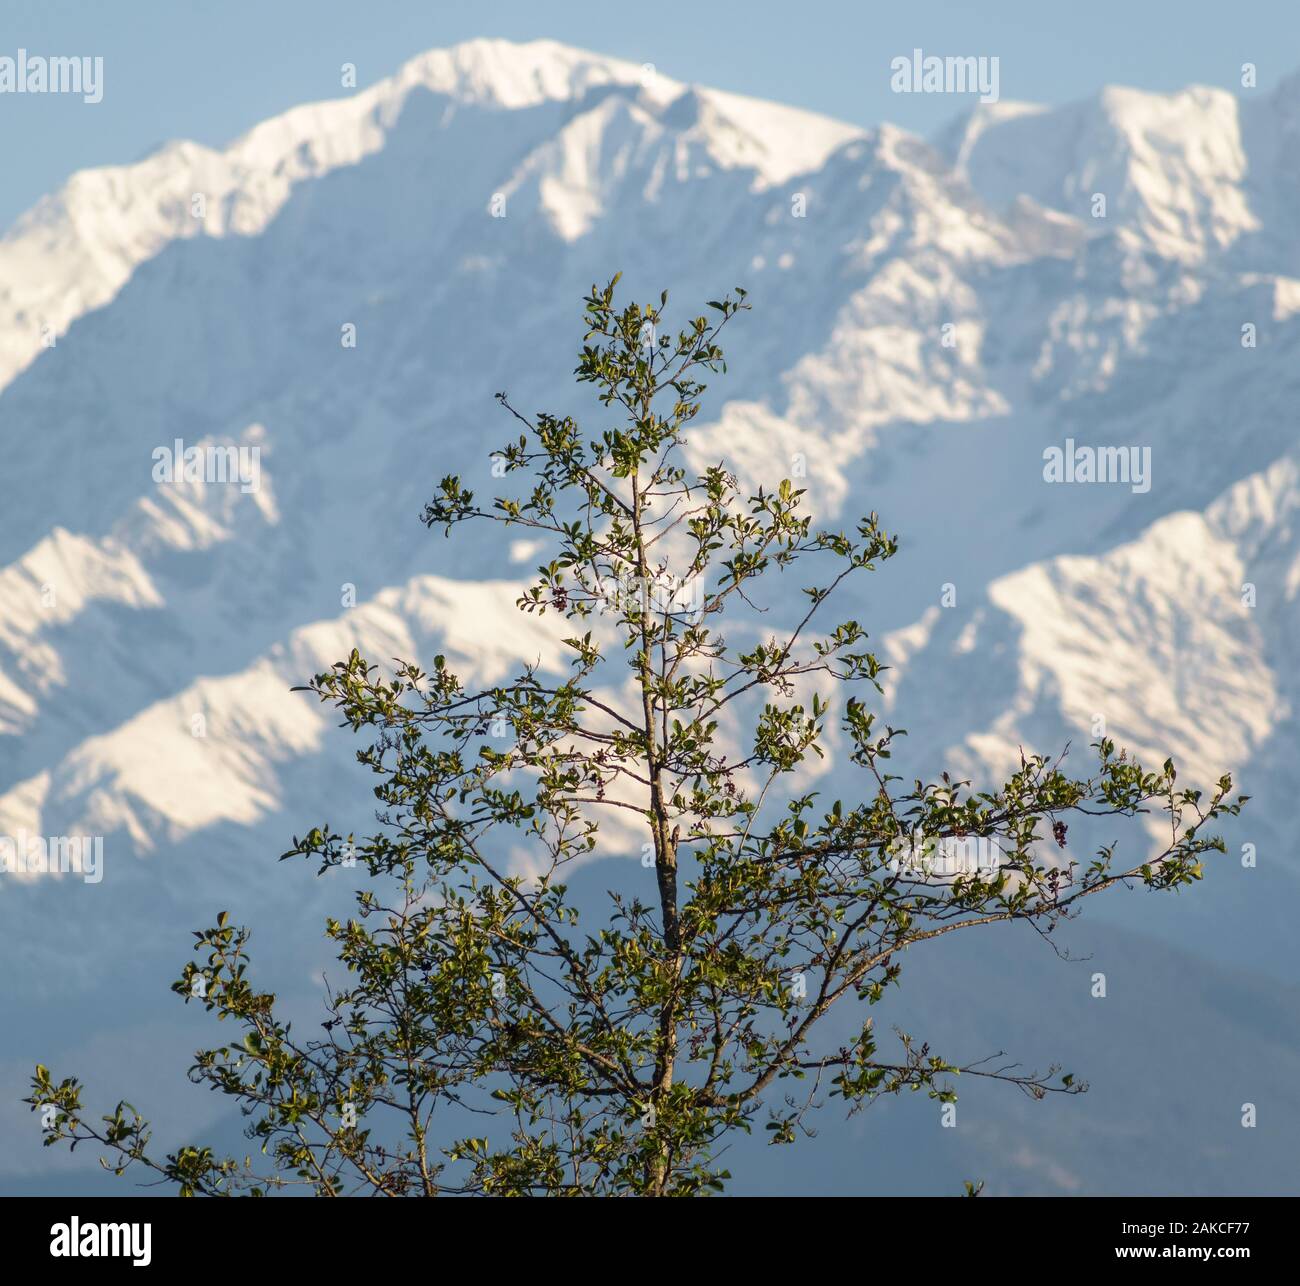 Portrait of a tall, green tree with the Himalayan peak of Chaukhamba in the background in the village of Chaukori in Uttarakhand, India. Stock Photo